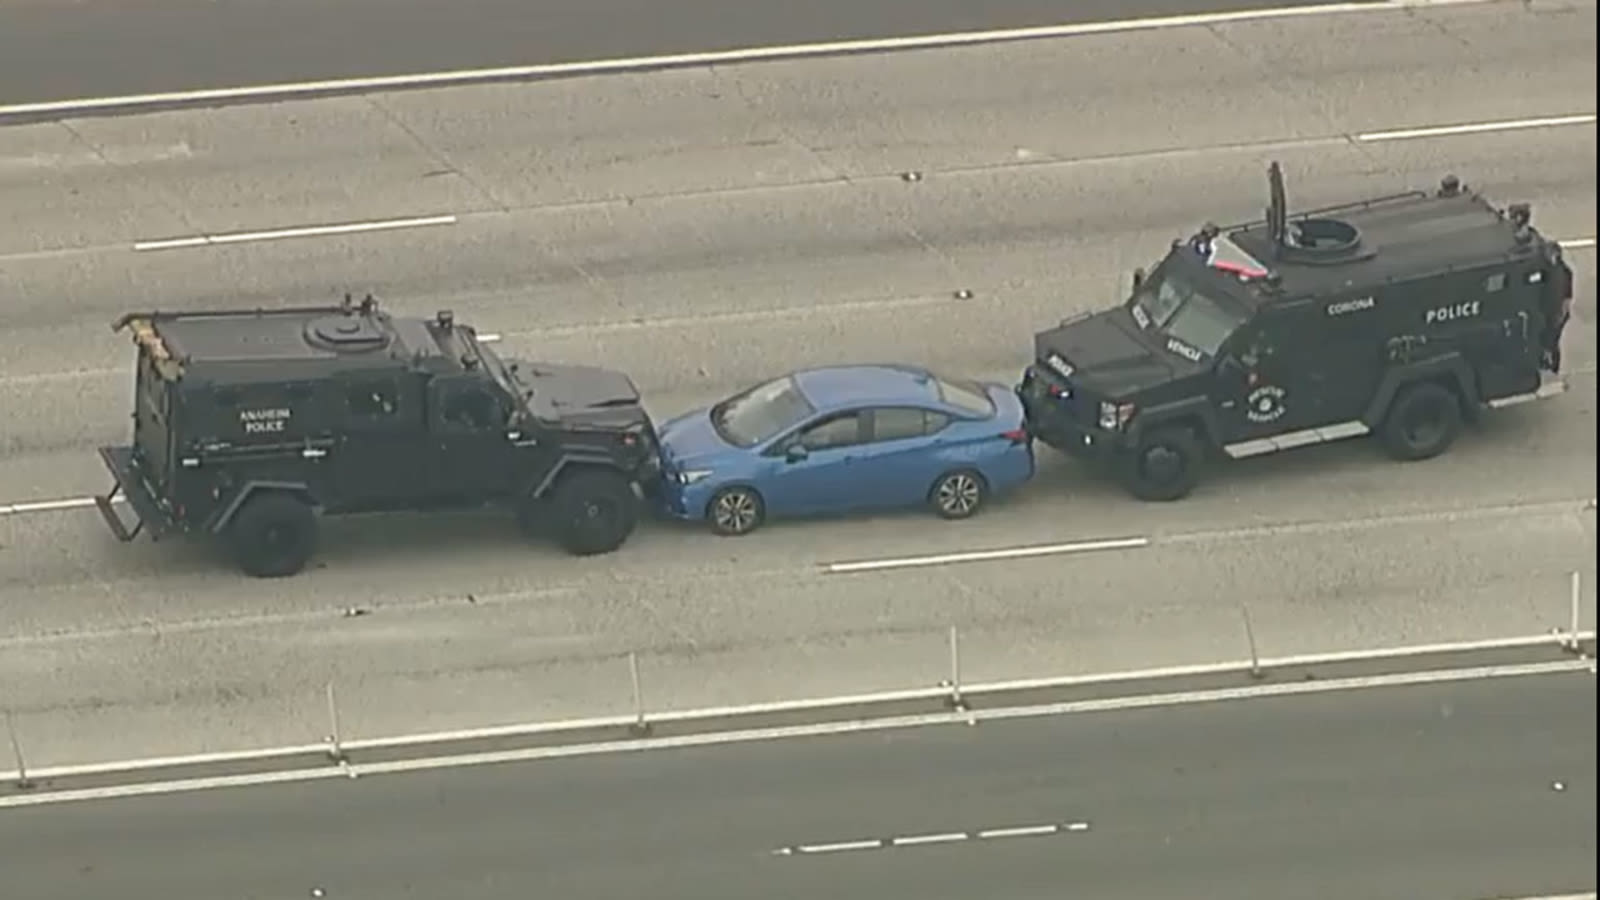 Major highway closed in Anaheim amid standoff involving police SWAT team, suspect: WATCH LIVE